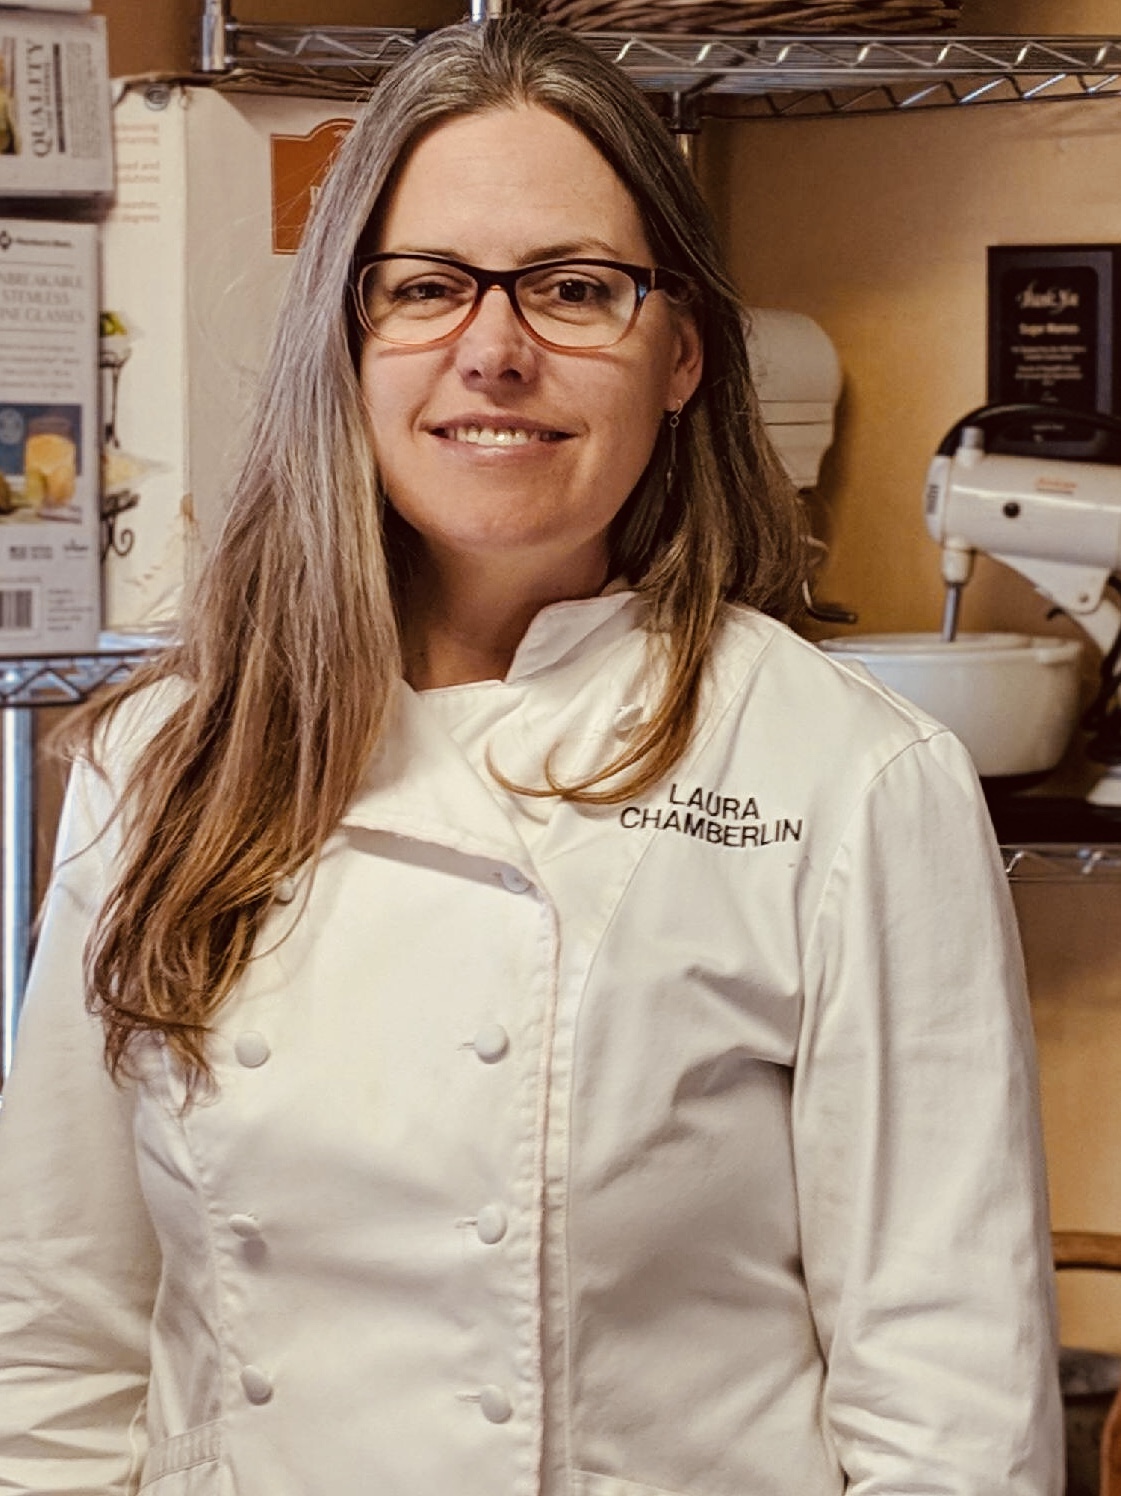 Chef Laura Chamberlin hones the versatility of cooking